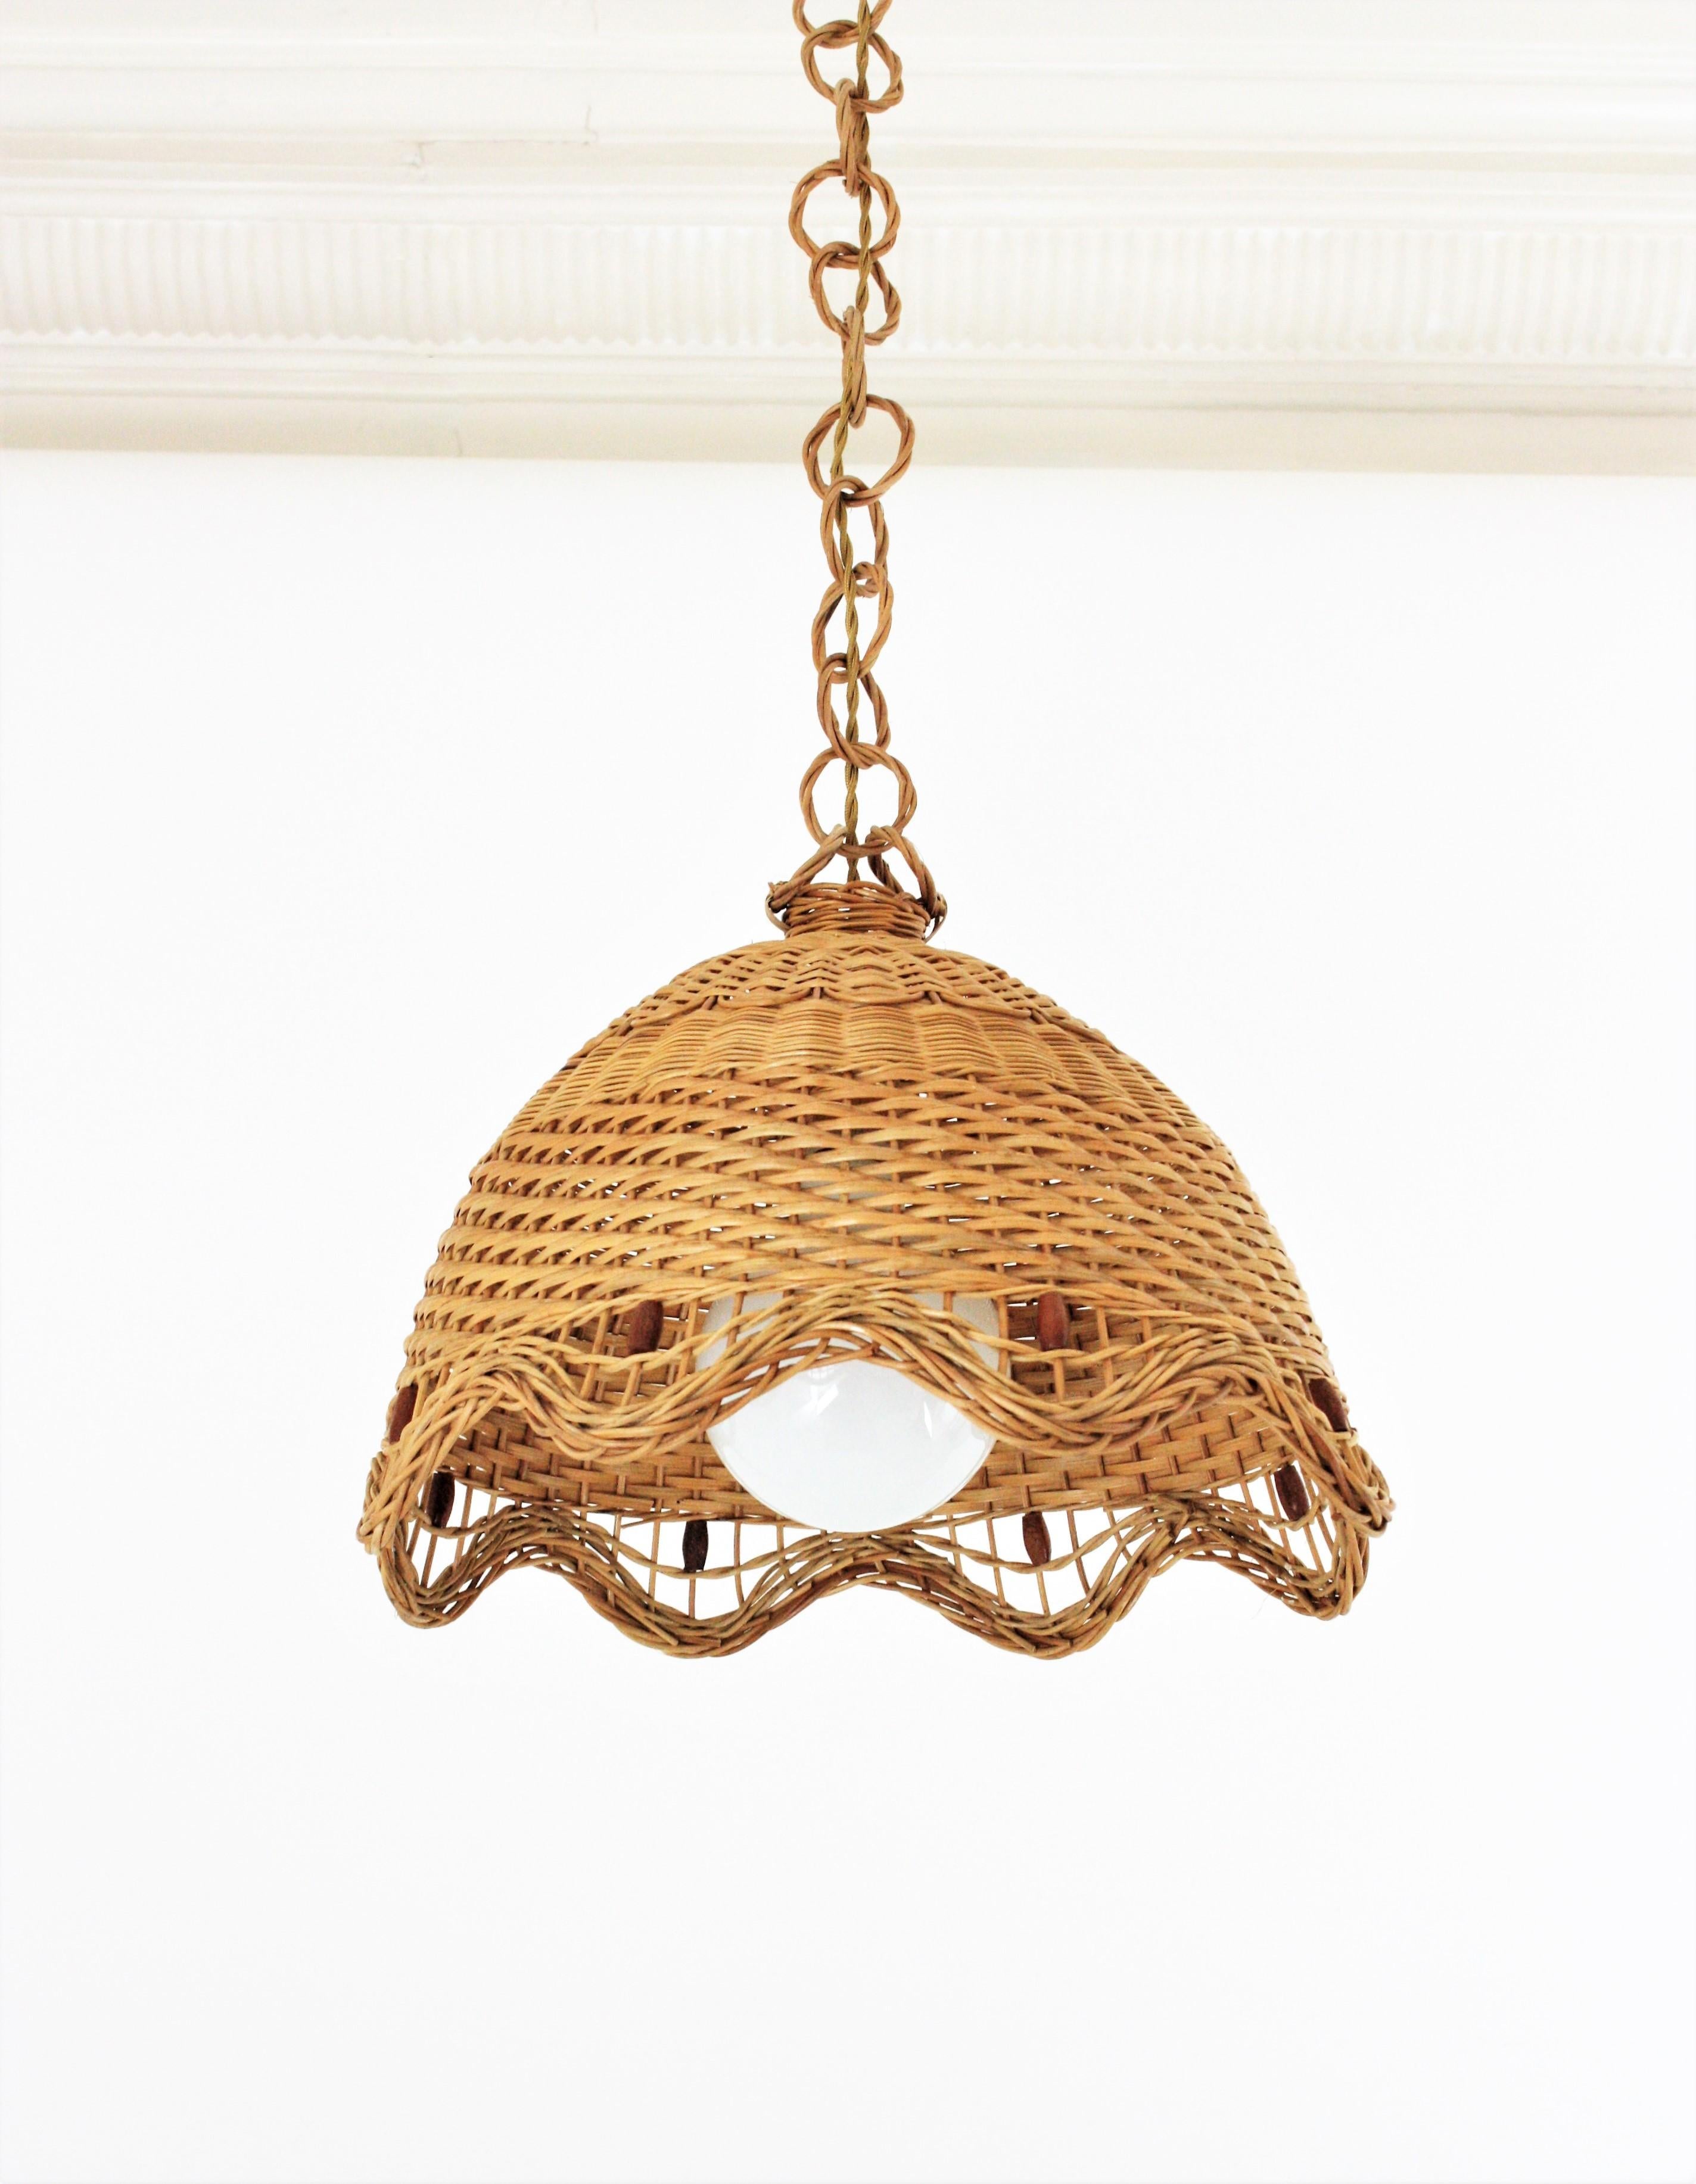 Eye-catching Lantern Woven Light Pendant in natural wicker and rattan with Scalloped Edge. Spain, 1960s.
This hand-crafted bell shaped hanging lamp features a woven wicker shade accented with brown cylinders as decorative details. It hangs from a